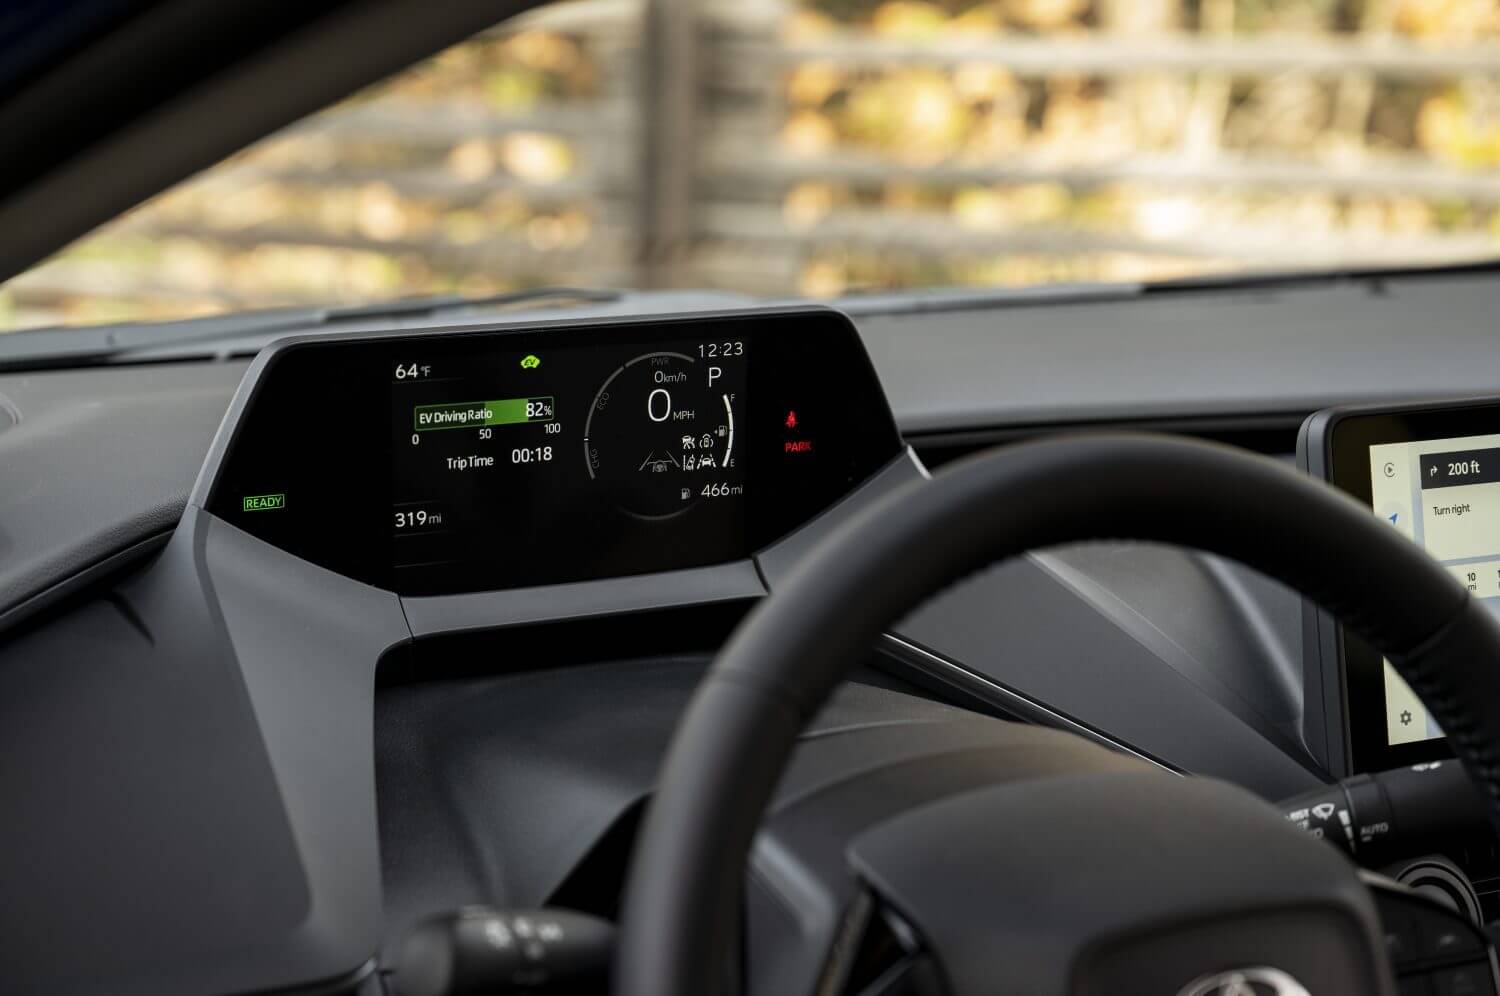 The dashboard of a Toyota Prius hybrid electric vehicle, showing engine status.